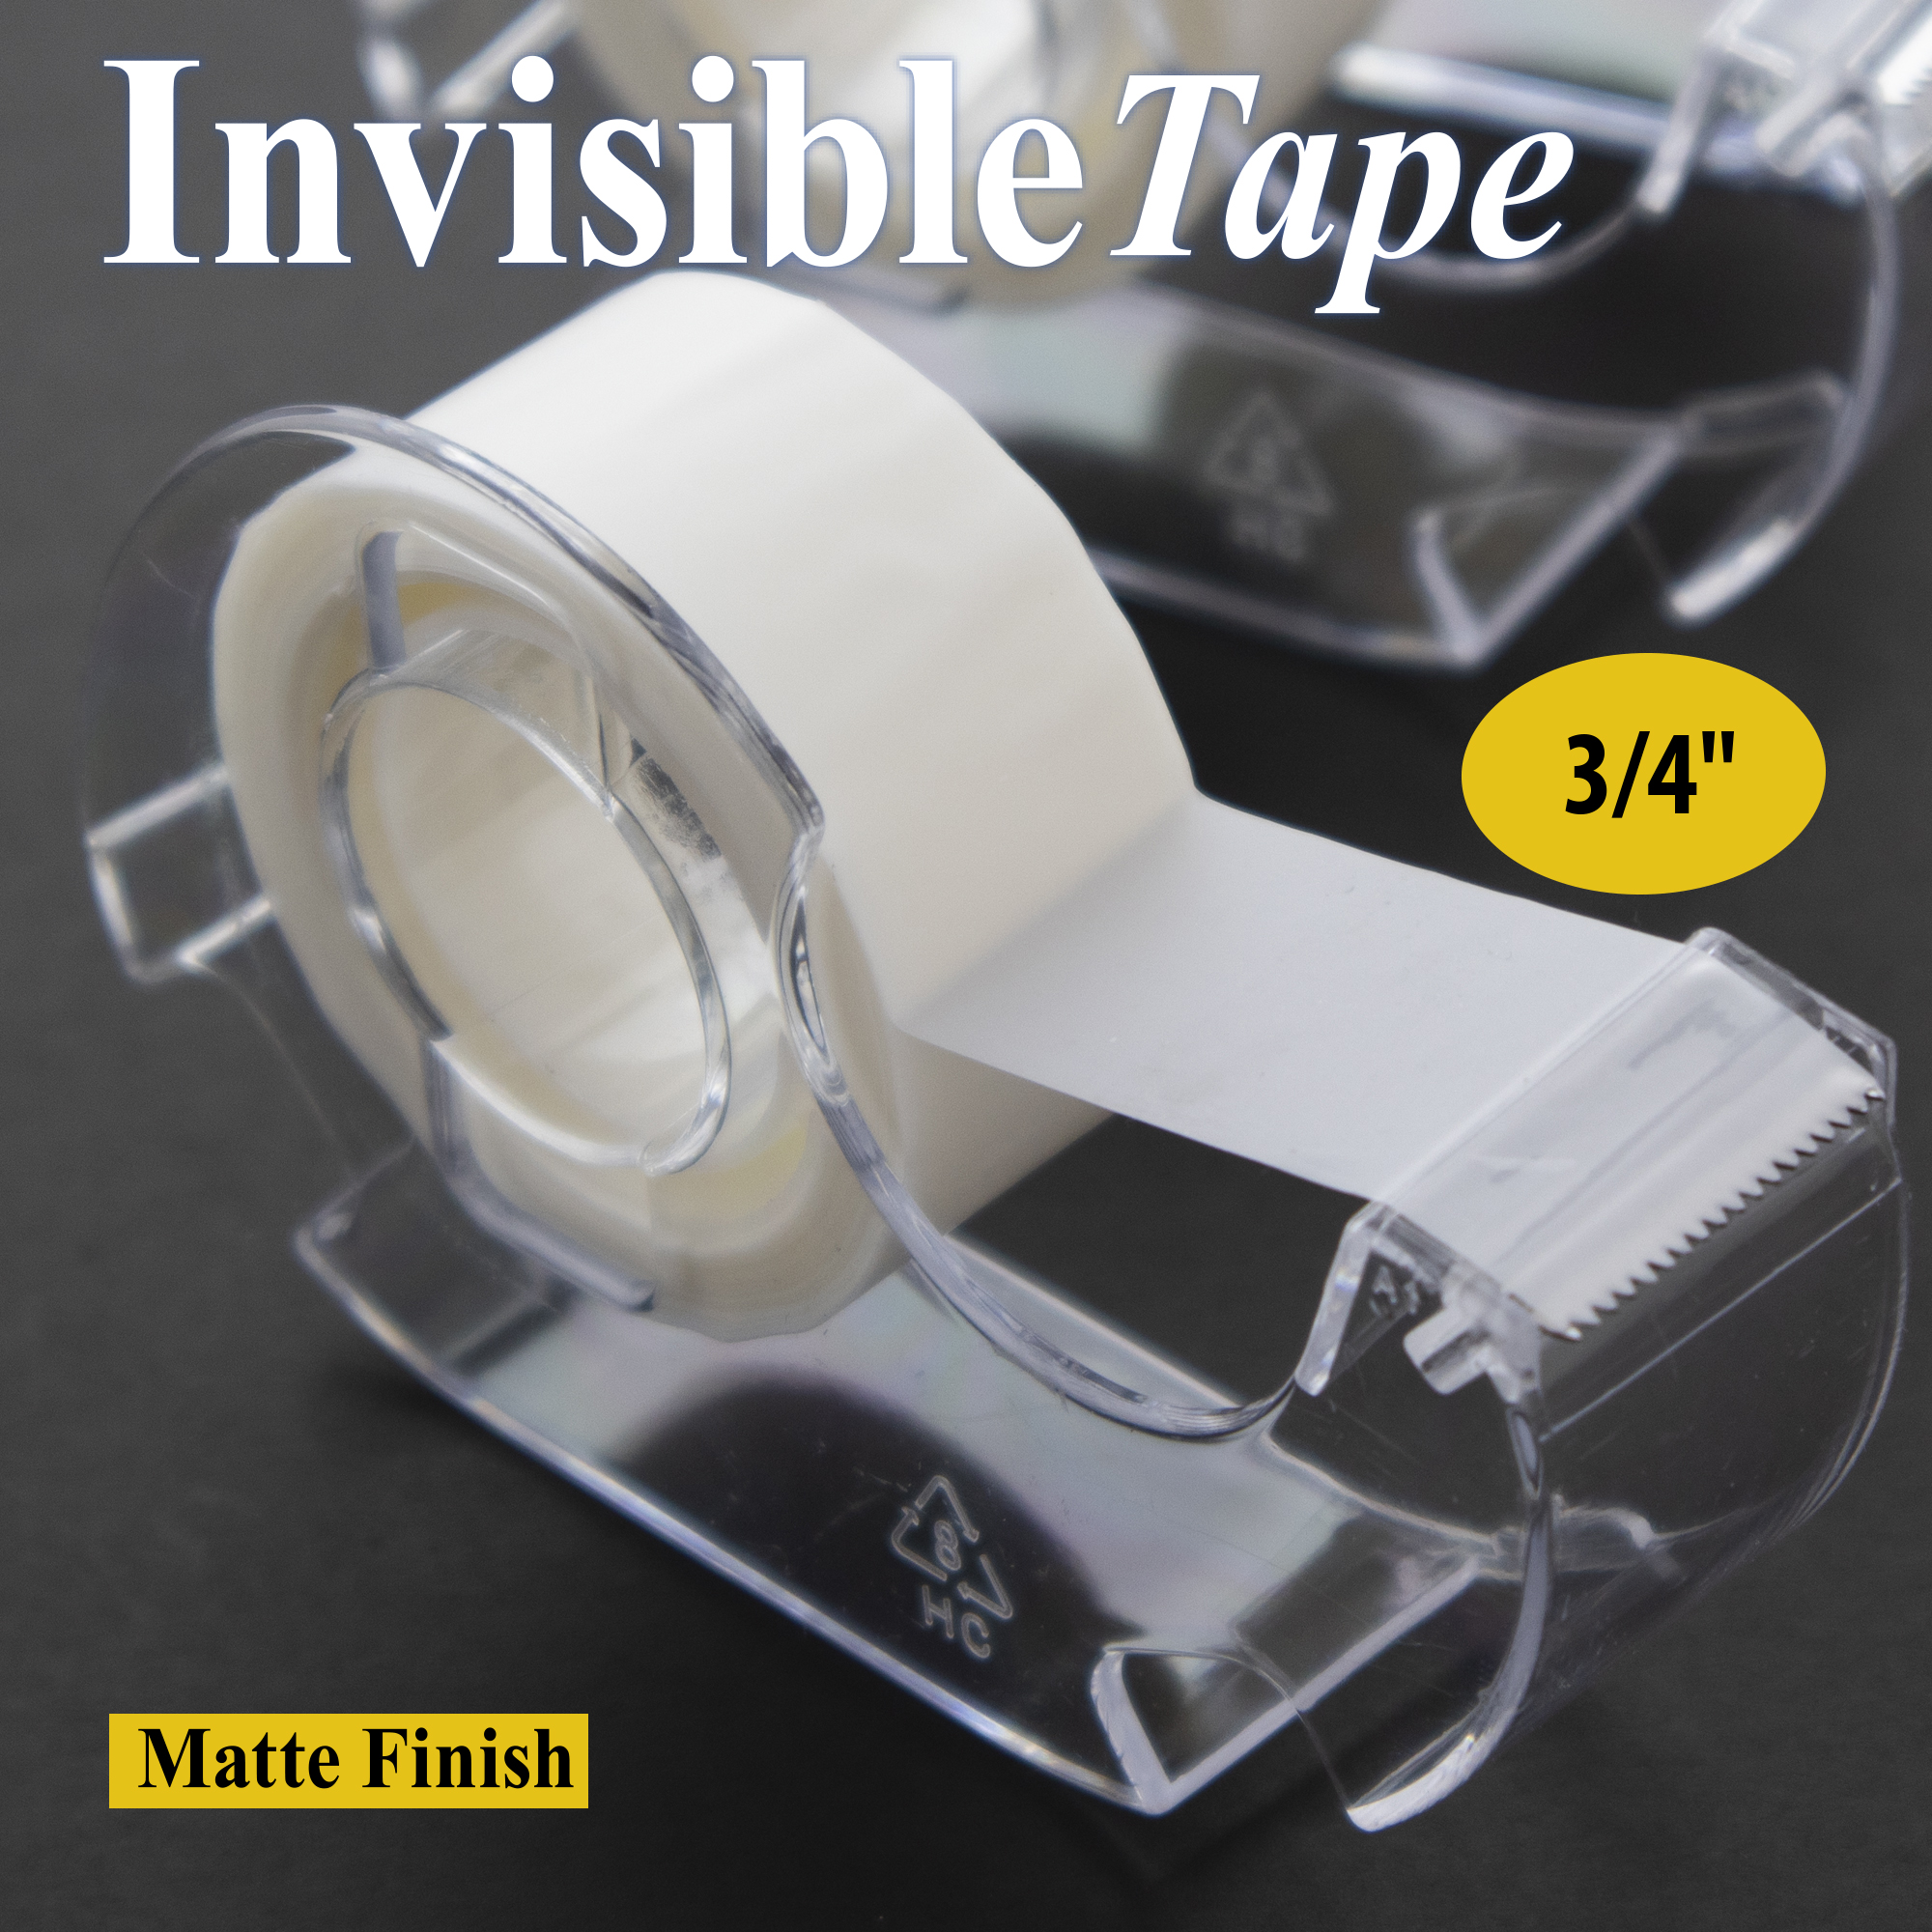 Wholesale invisible tape with dispenser For Variegated Sizes Of Tape 